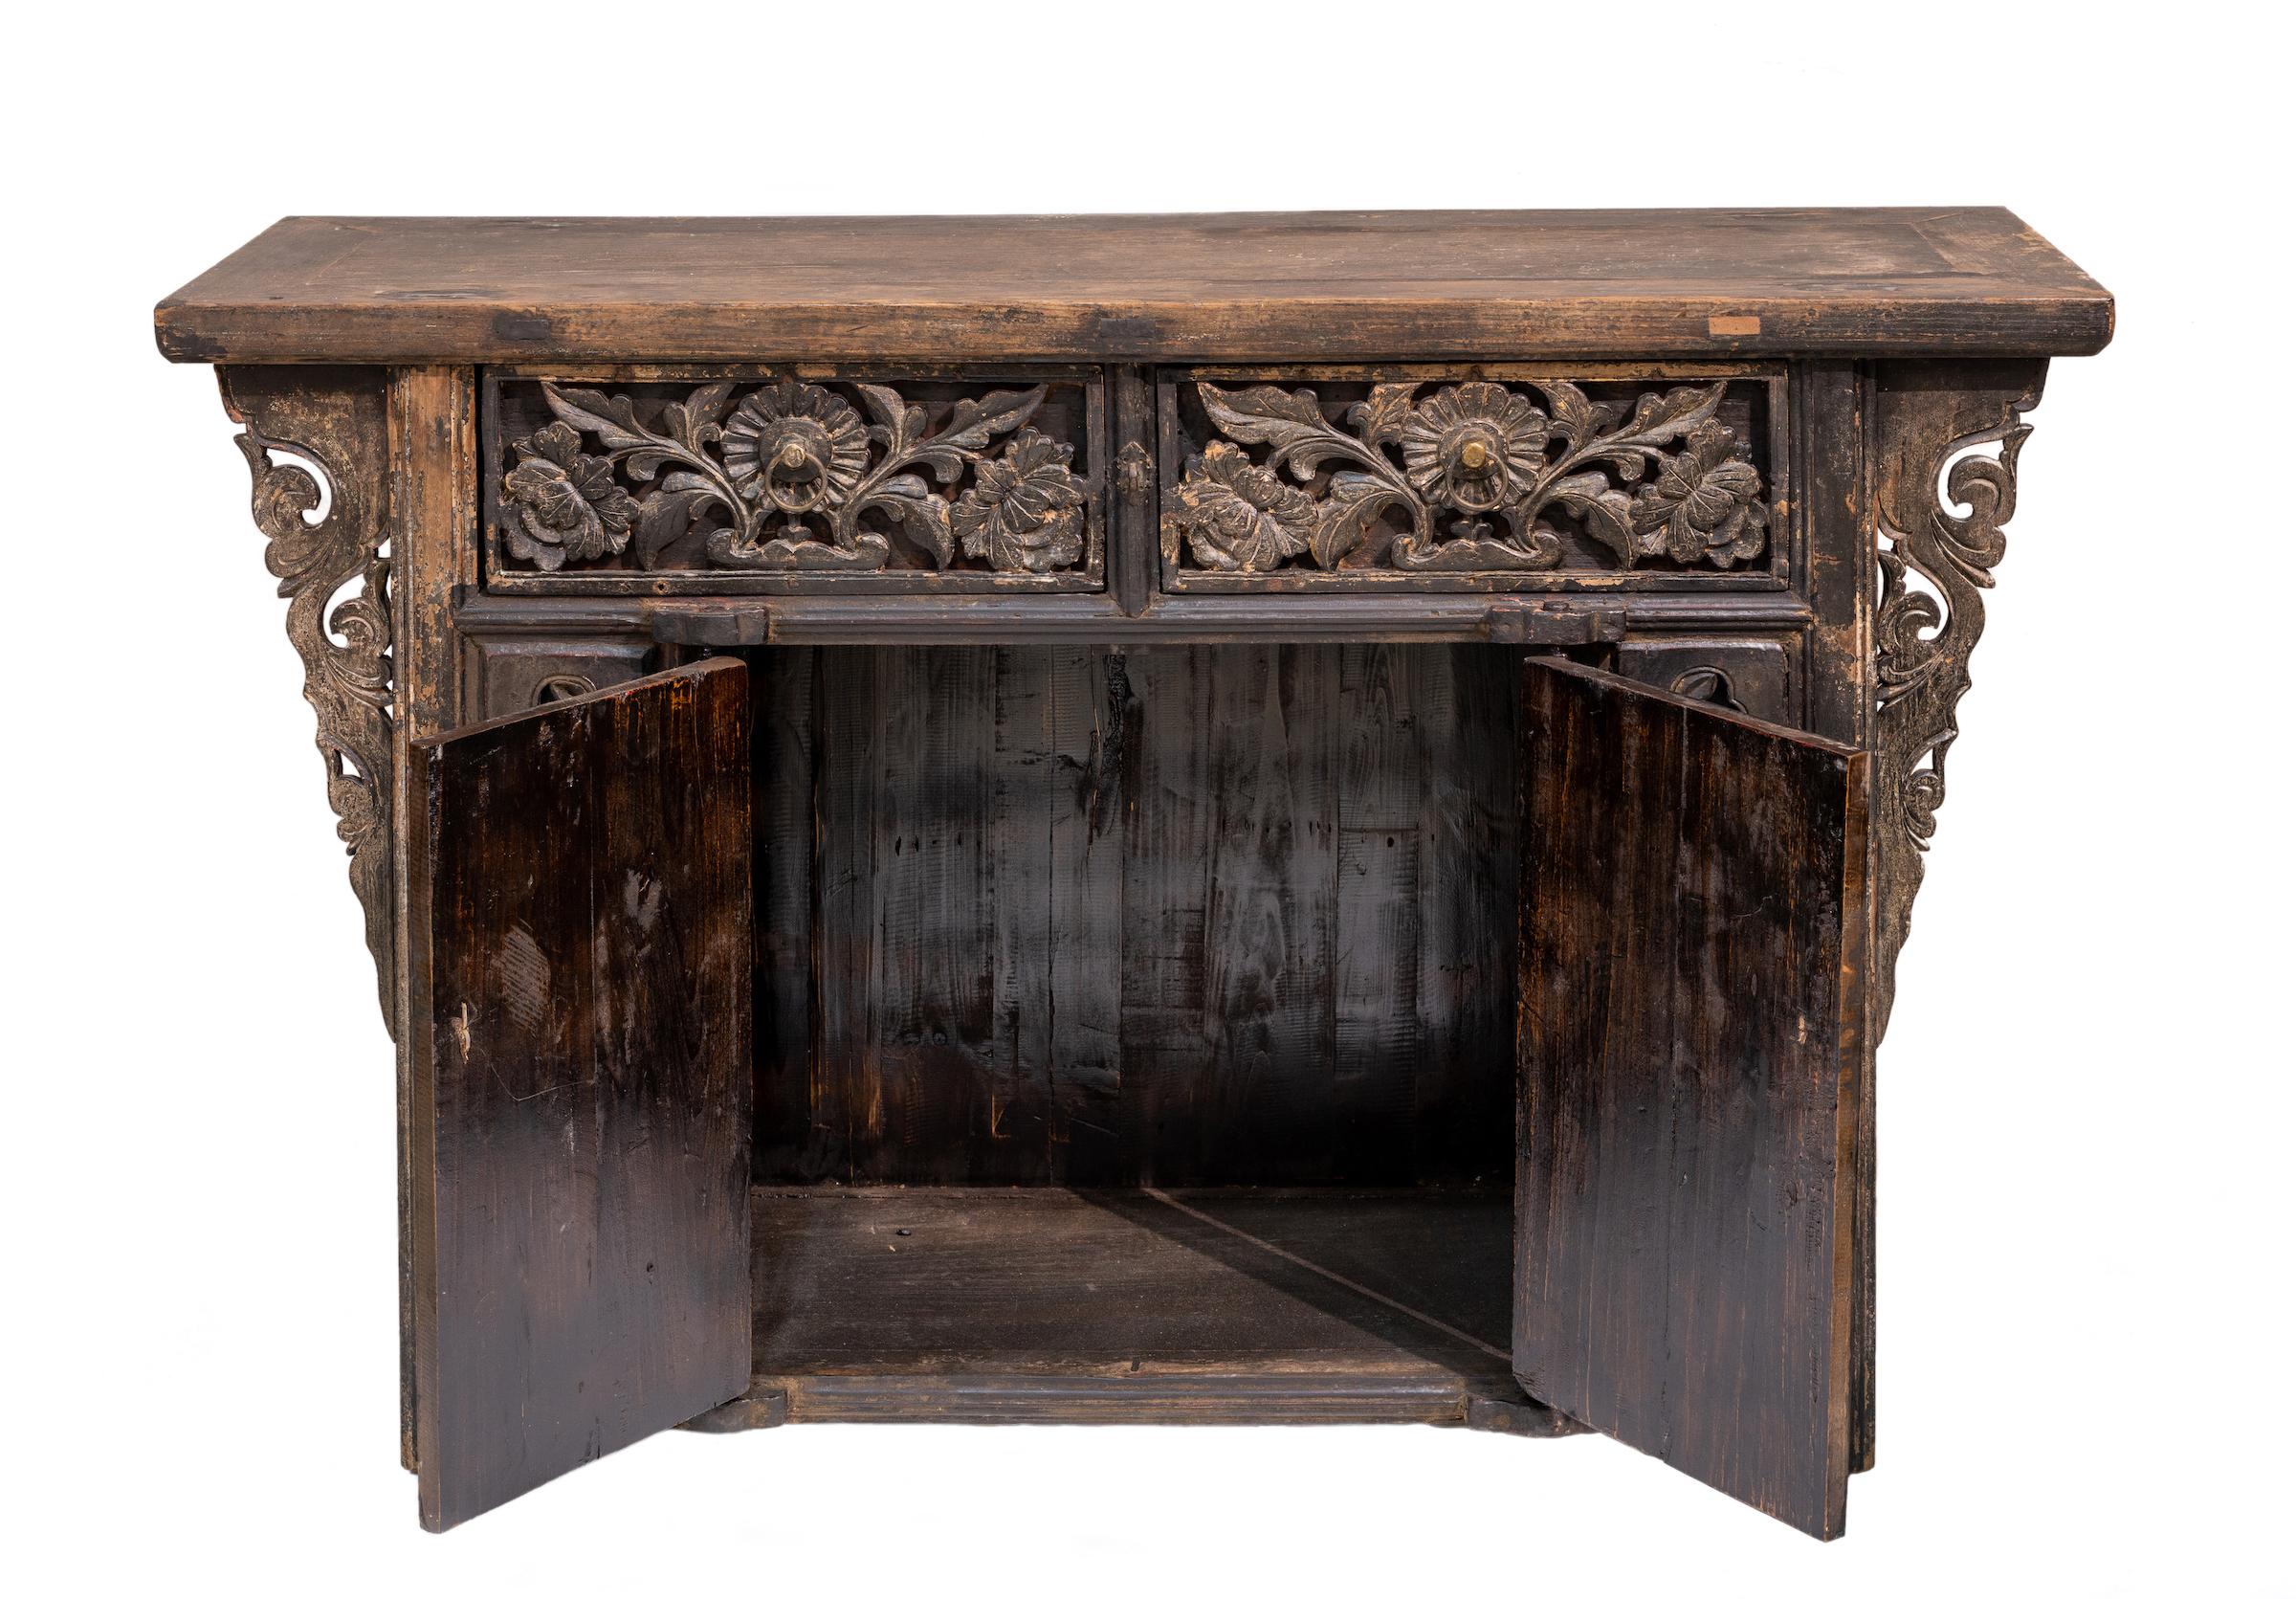 A mid-19th century coffer-style cabinet from Shanxi province, China. Approx. 150-200 years old. The carvings on this cabinet has a floral theme, and the carvings on the drawers are outstanding as they are very deep and 3D. In contrast the doors have